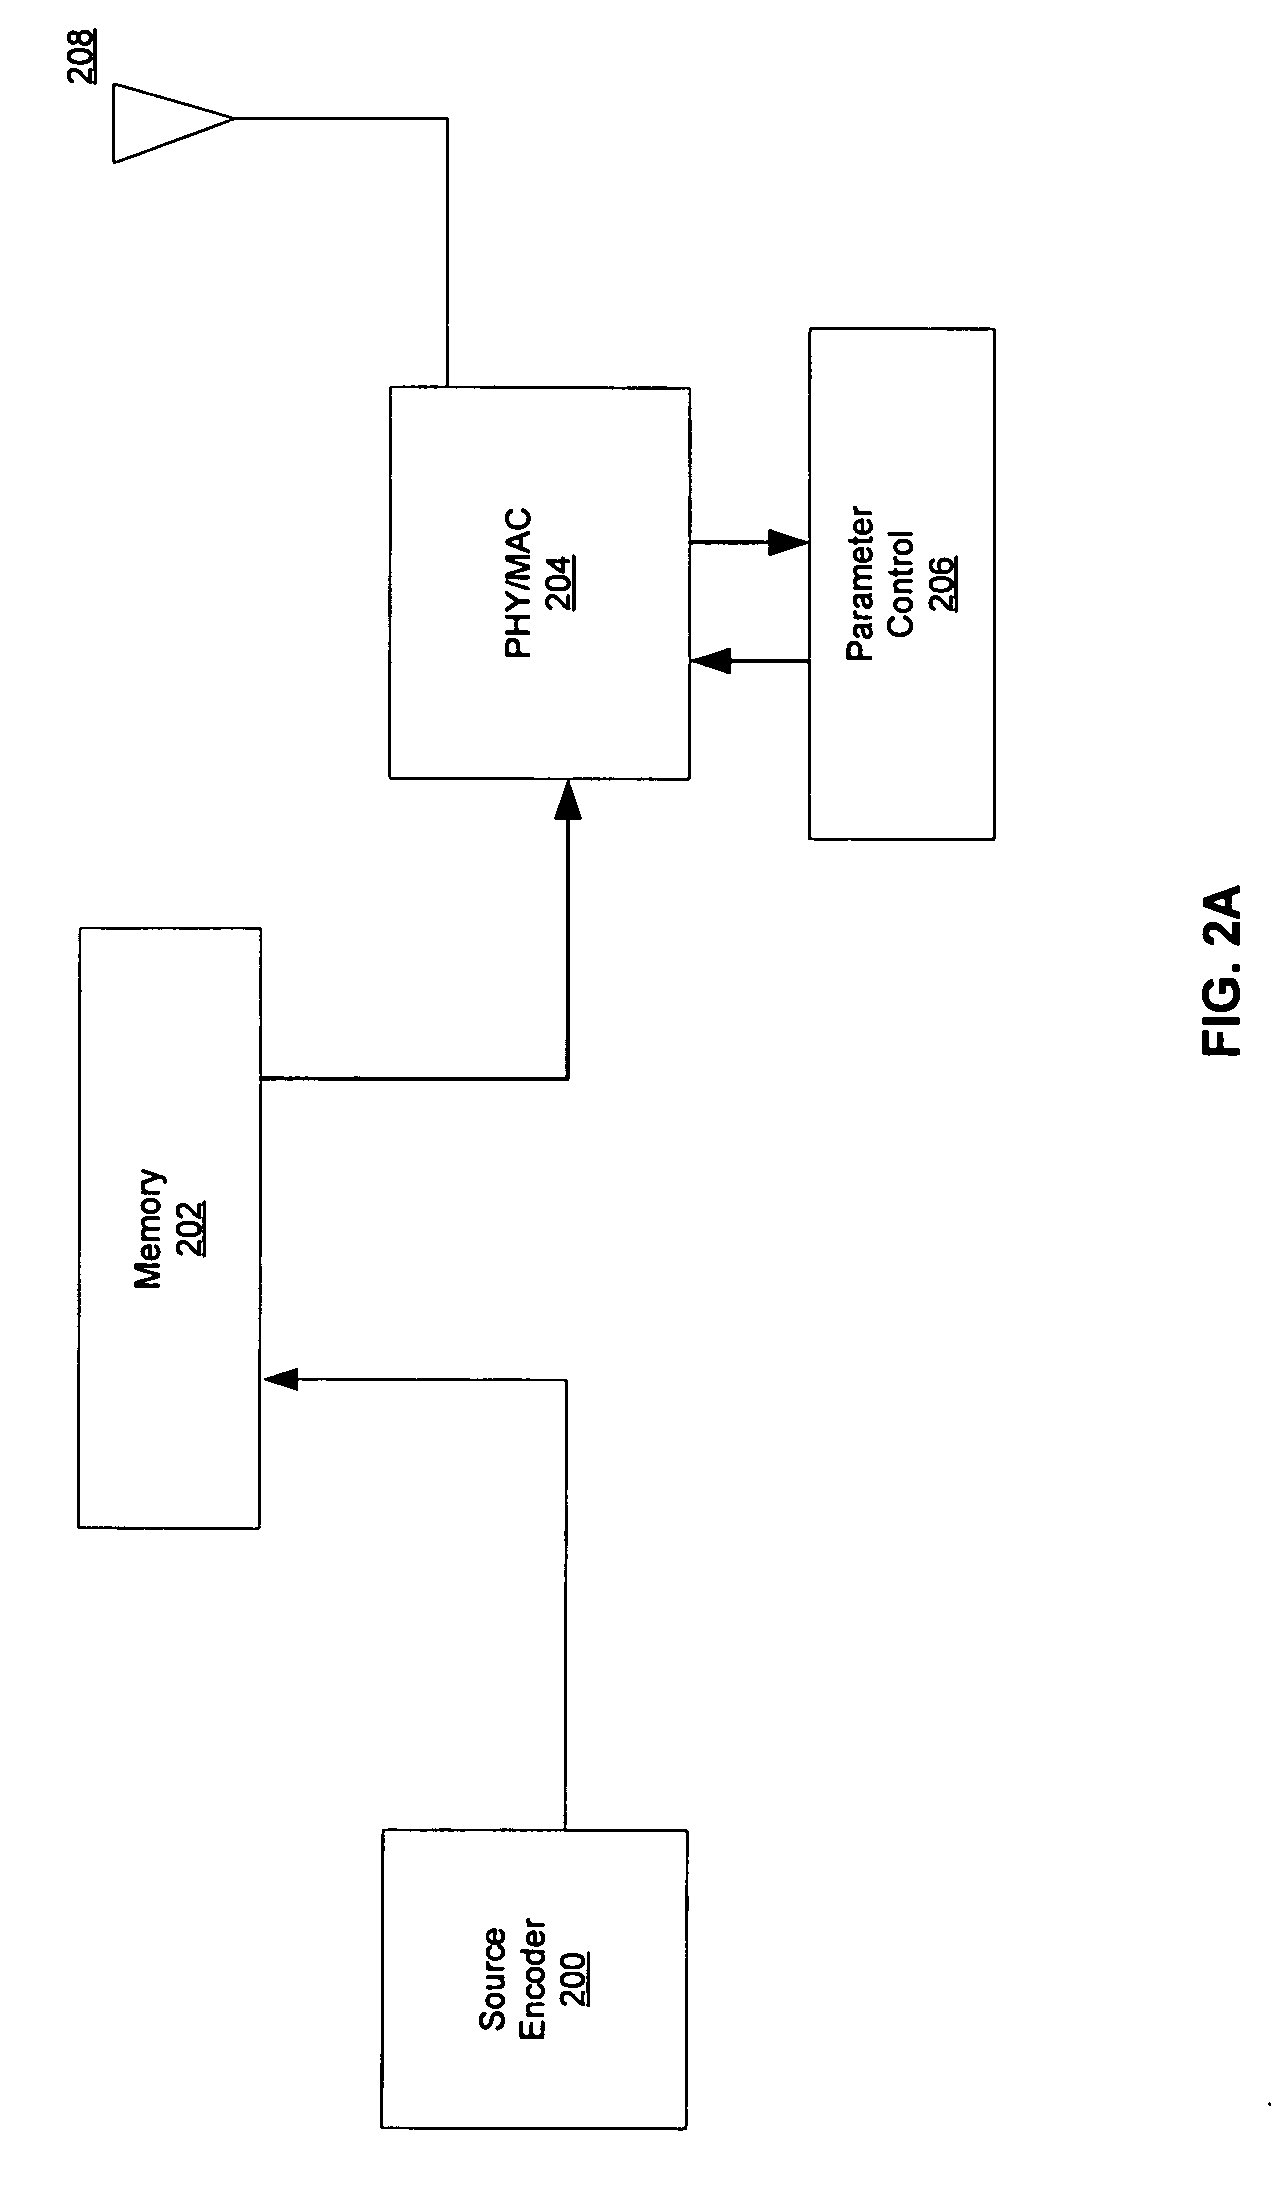 Method and system for providing visually related content description to the physical layer